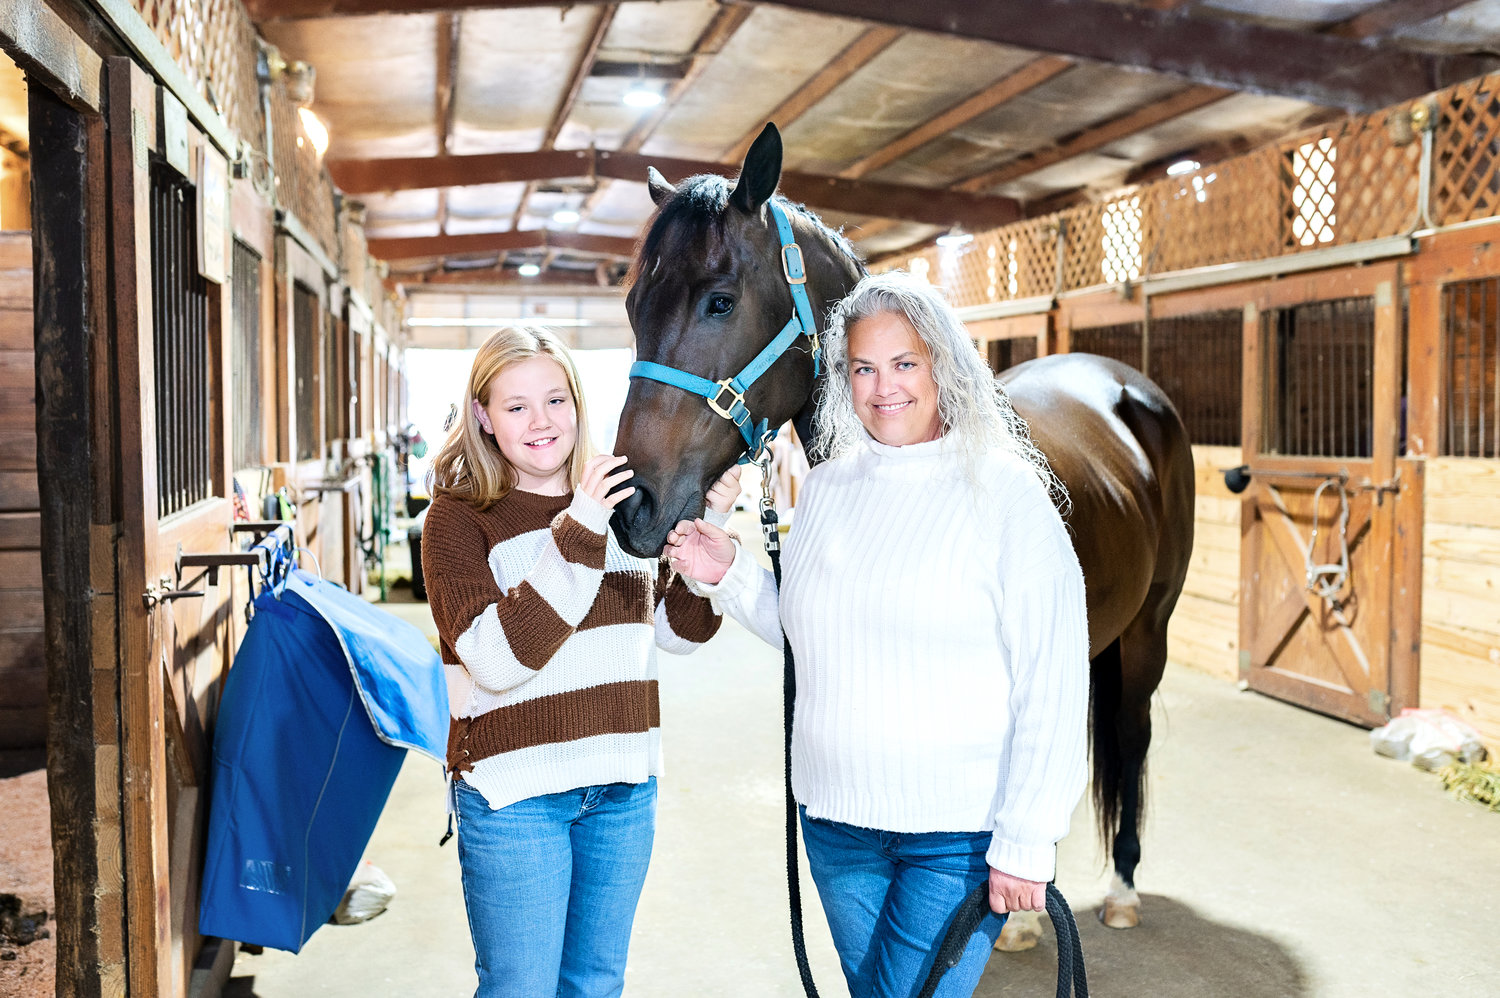 Kristin Wilkey shares her love of horses with her daughter Payge.